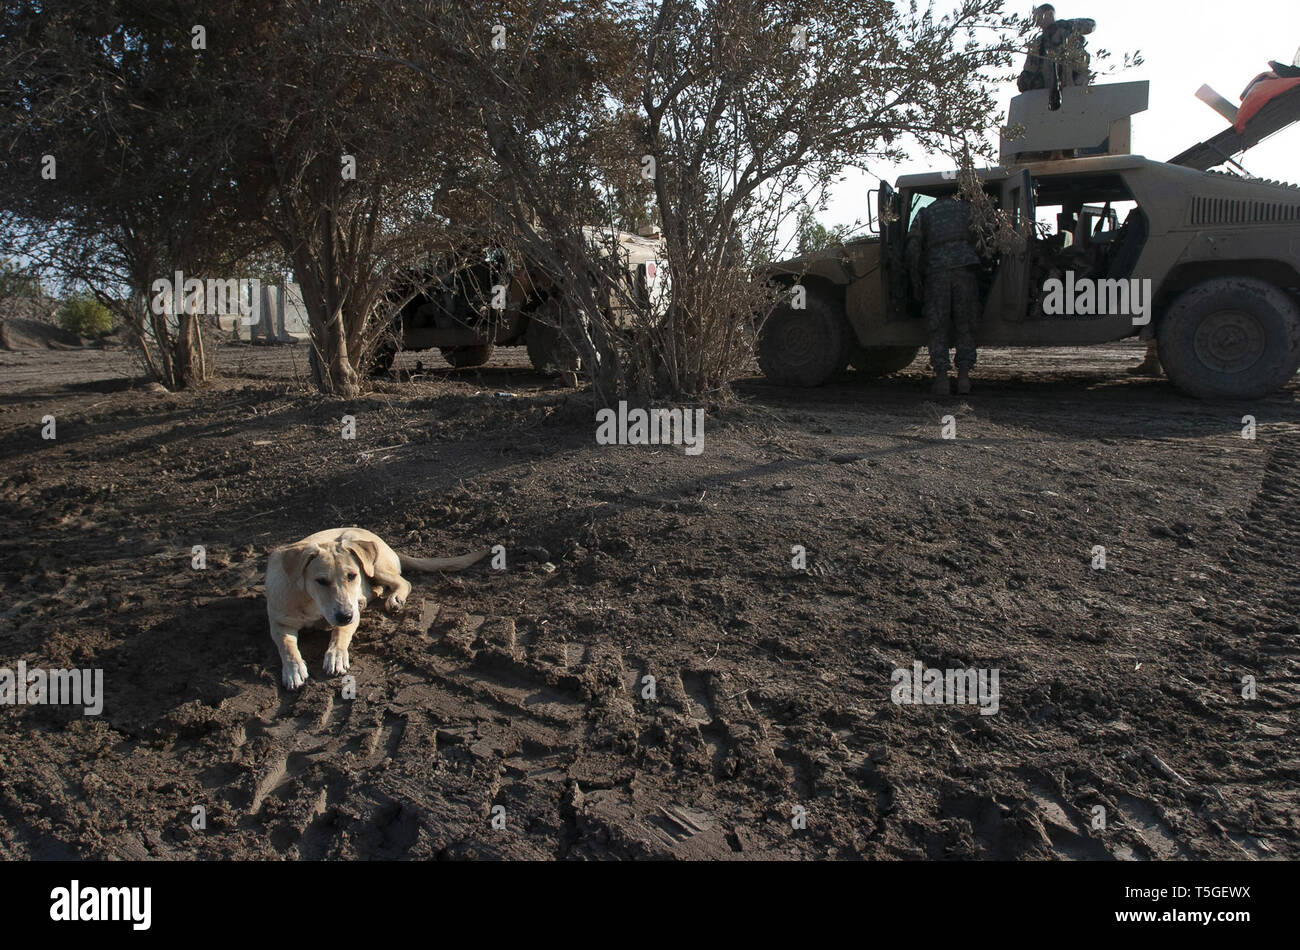 Baghdad, Baghdad, Iraq. 14th Jan, 2006. A dog at an American Army combat outpost near Abu Ghraib, Iraq, January 14, 2006. The dog was a local stray adopted by the unit. Despite orders to kill it, the unit kept it. Credit: Bill Putnam/ZUMA Wire/Alamy Live News Stock Photo